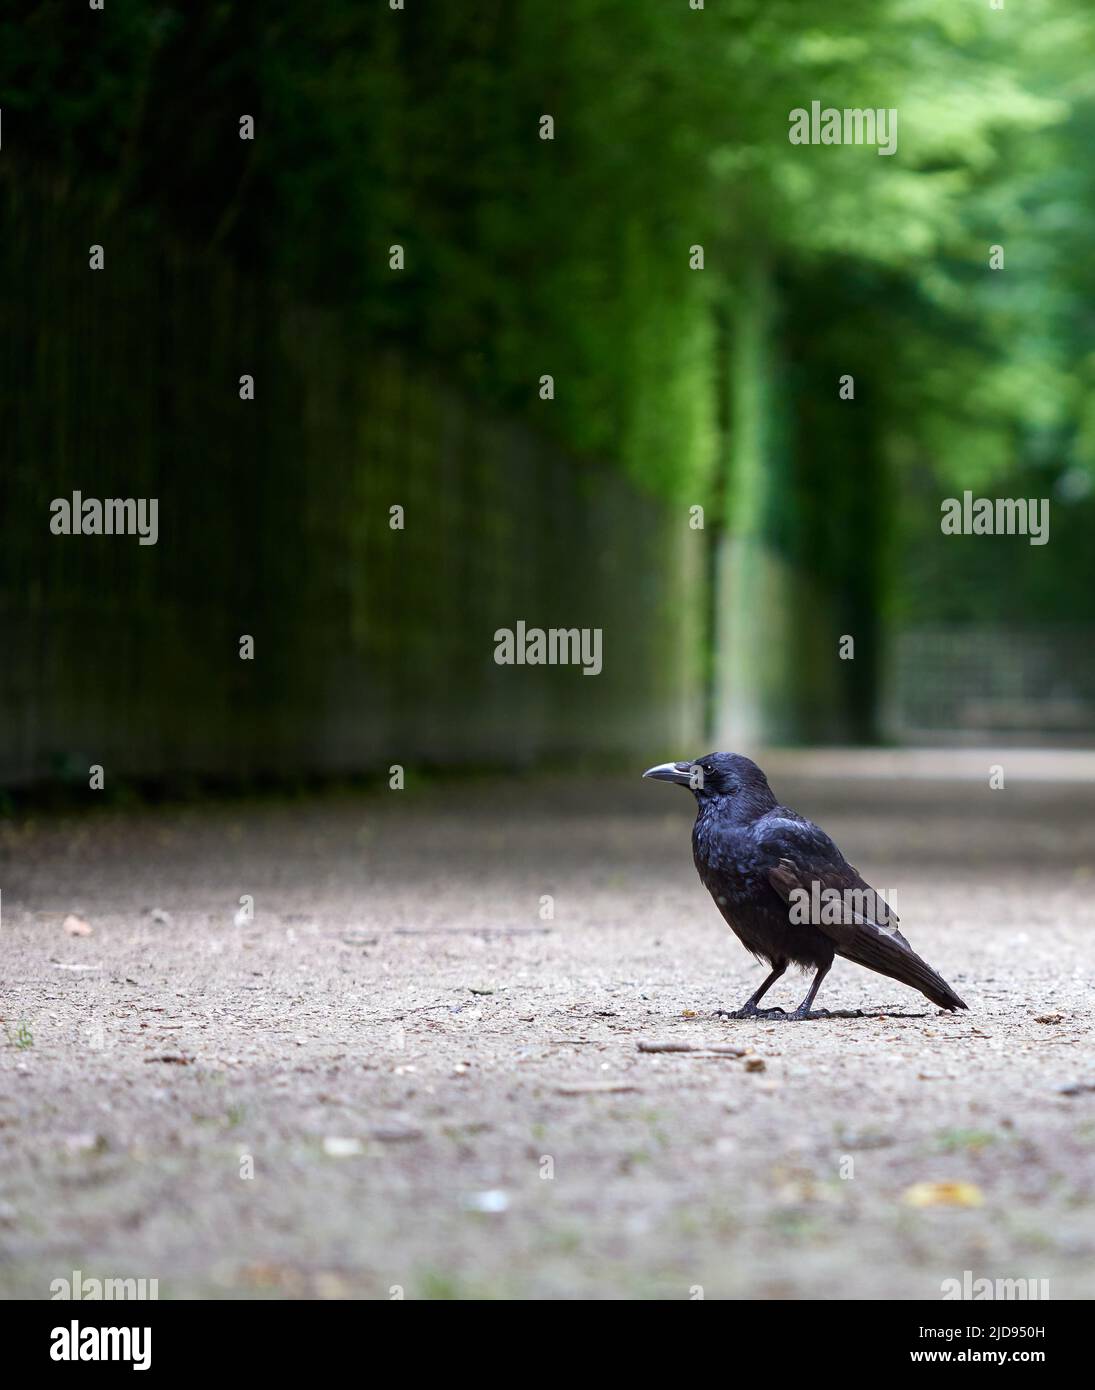 Crow standing on the ground during the summer Stock Photo